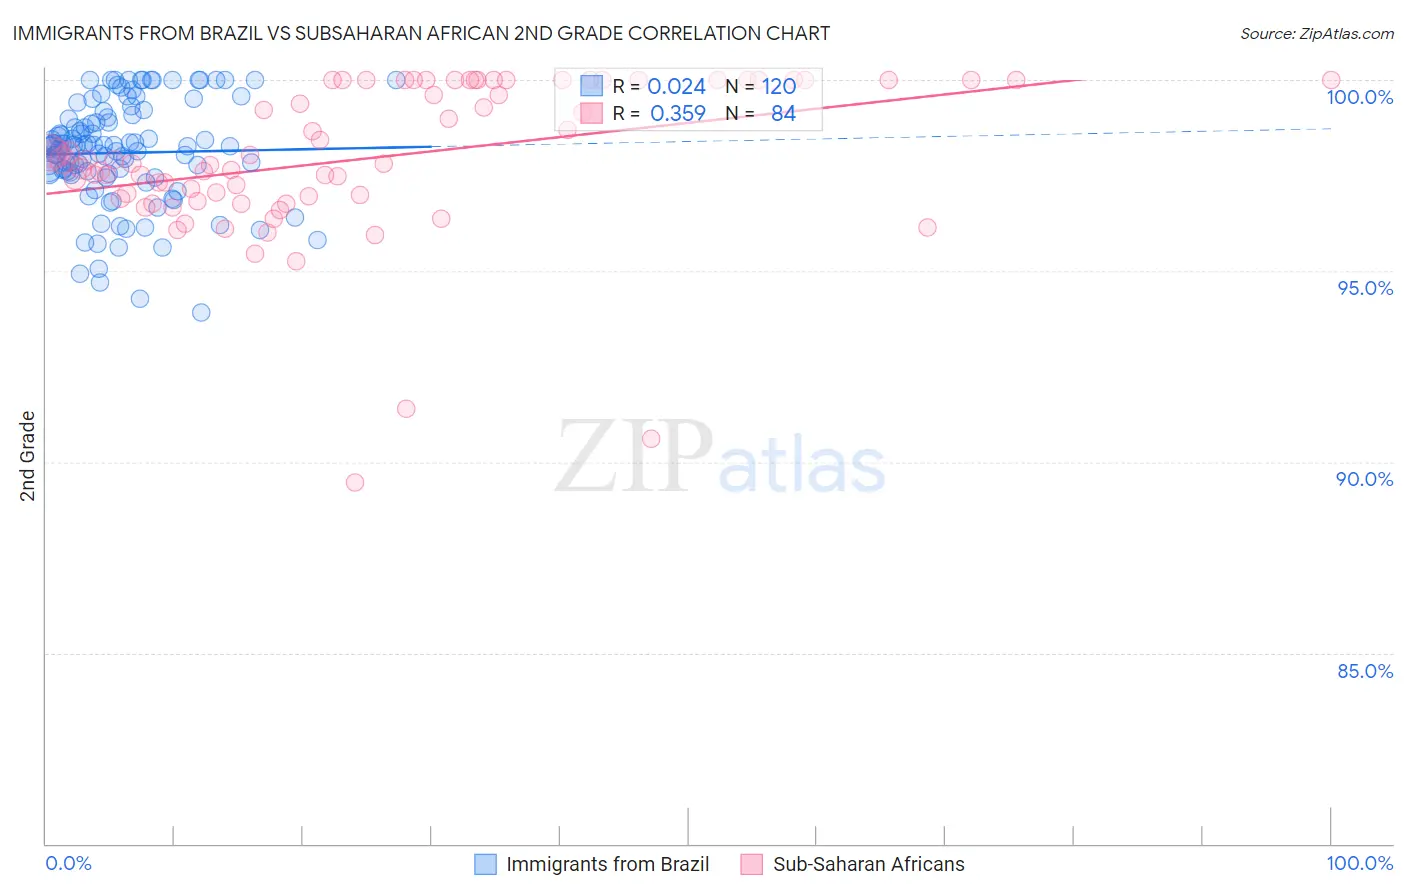 Immigrants from Brazil vs Subsaharan African 2nd Grade